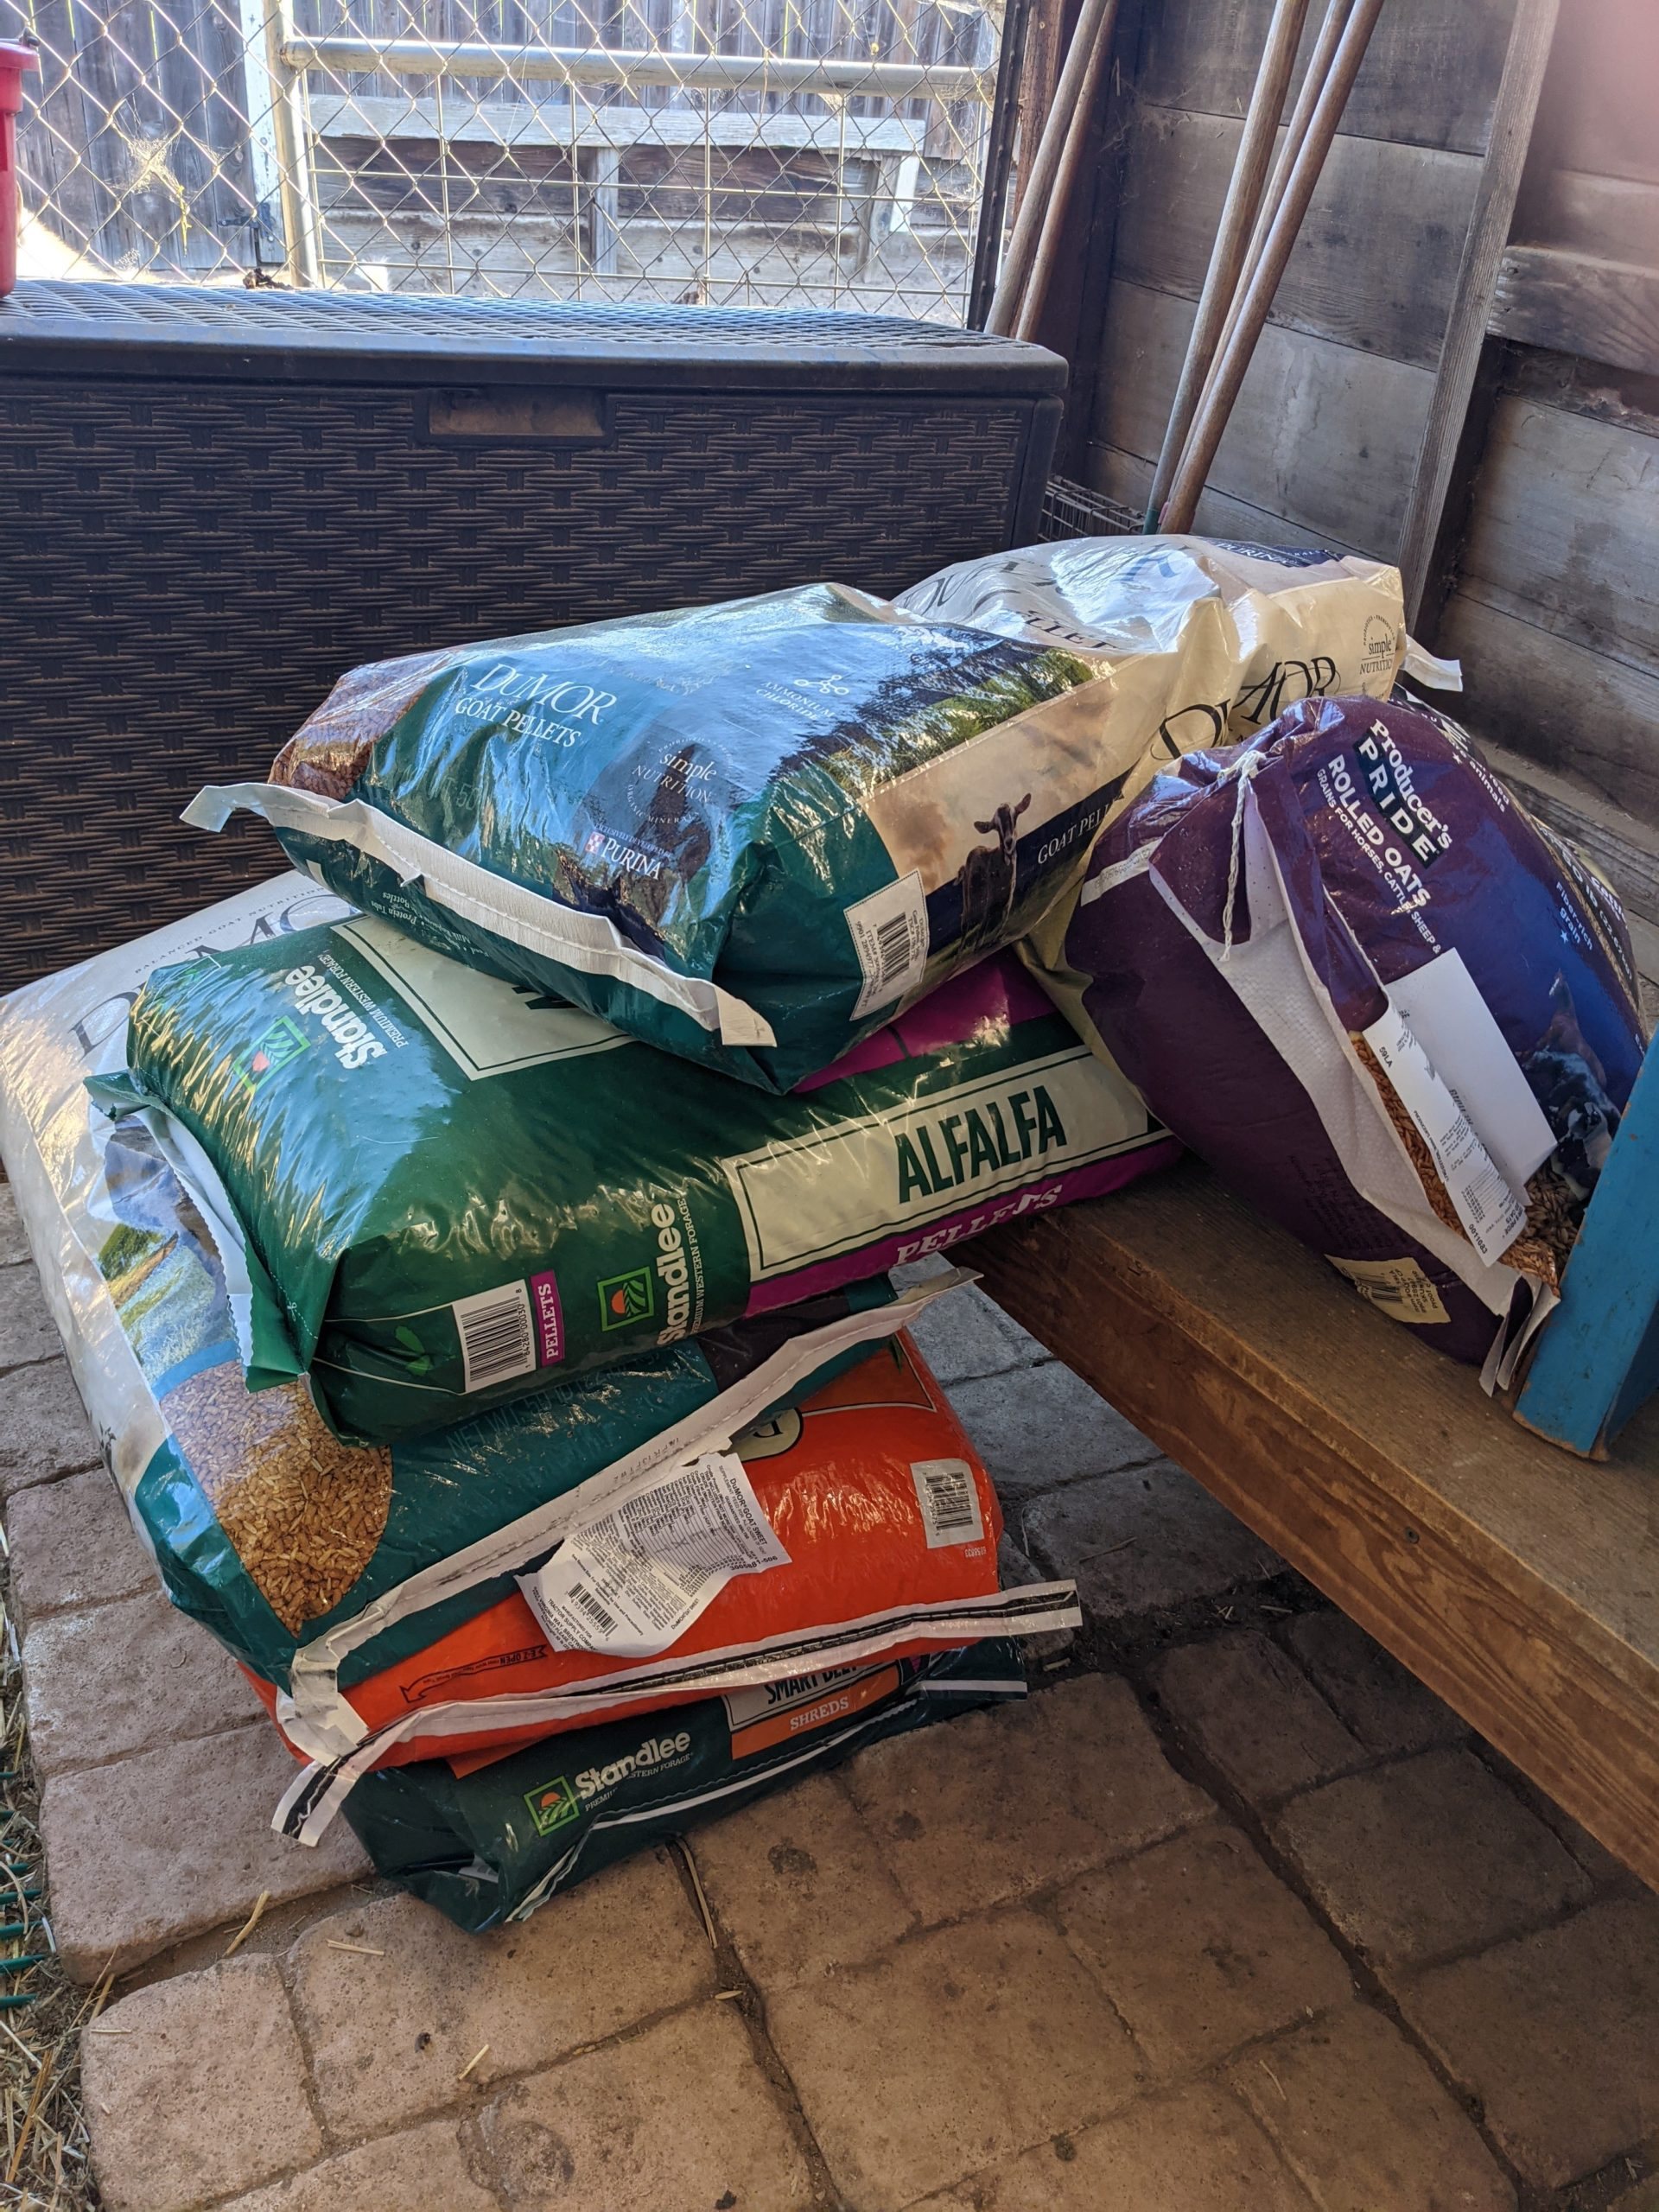 Bags of feed to make grain mixture